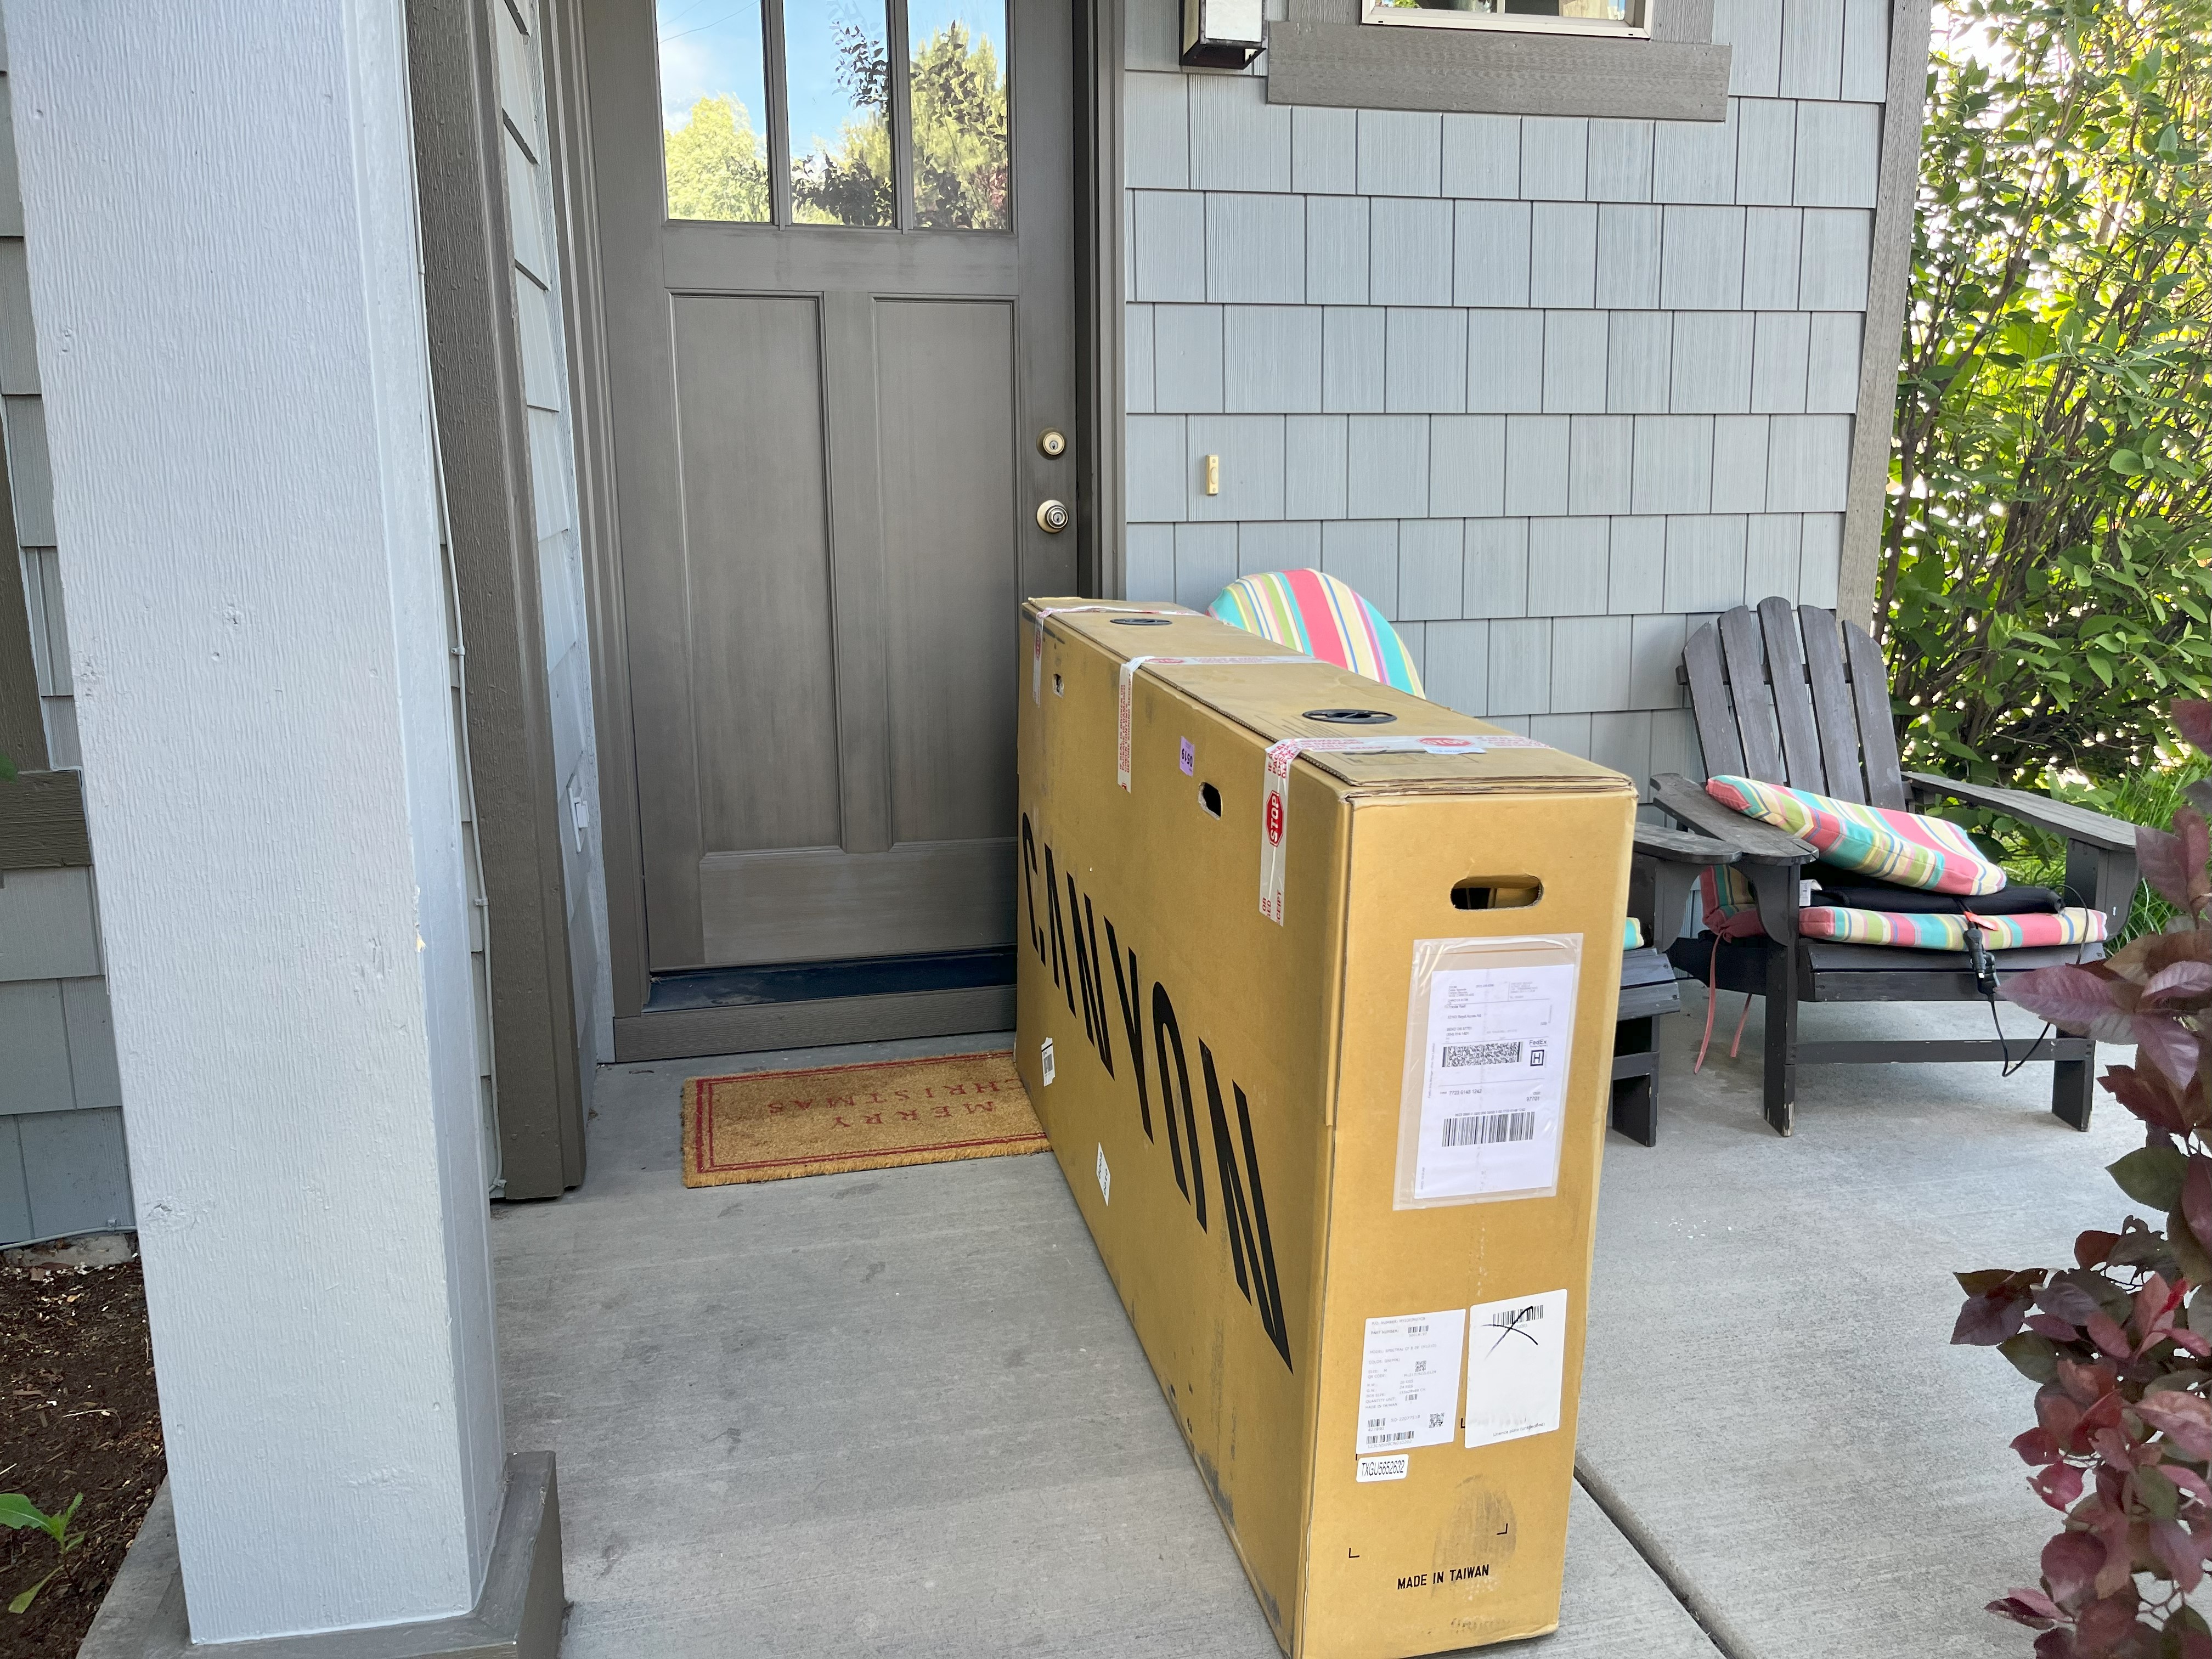 A bike from Canyon is finally delivered on the doorstep